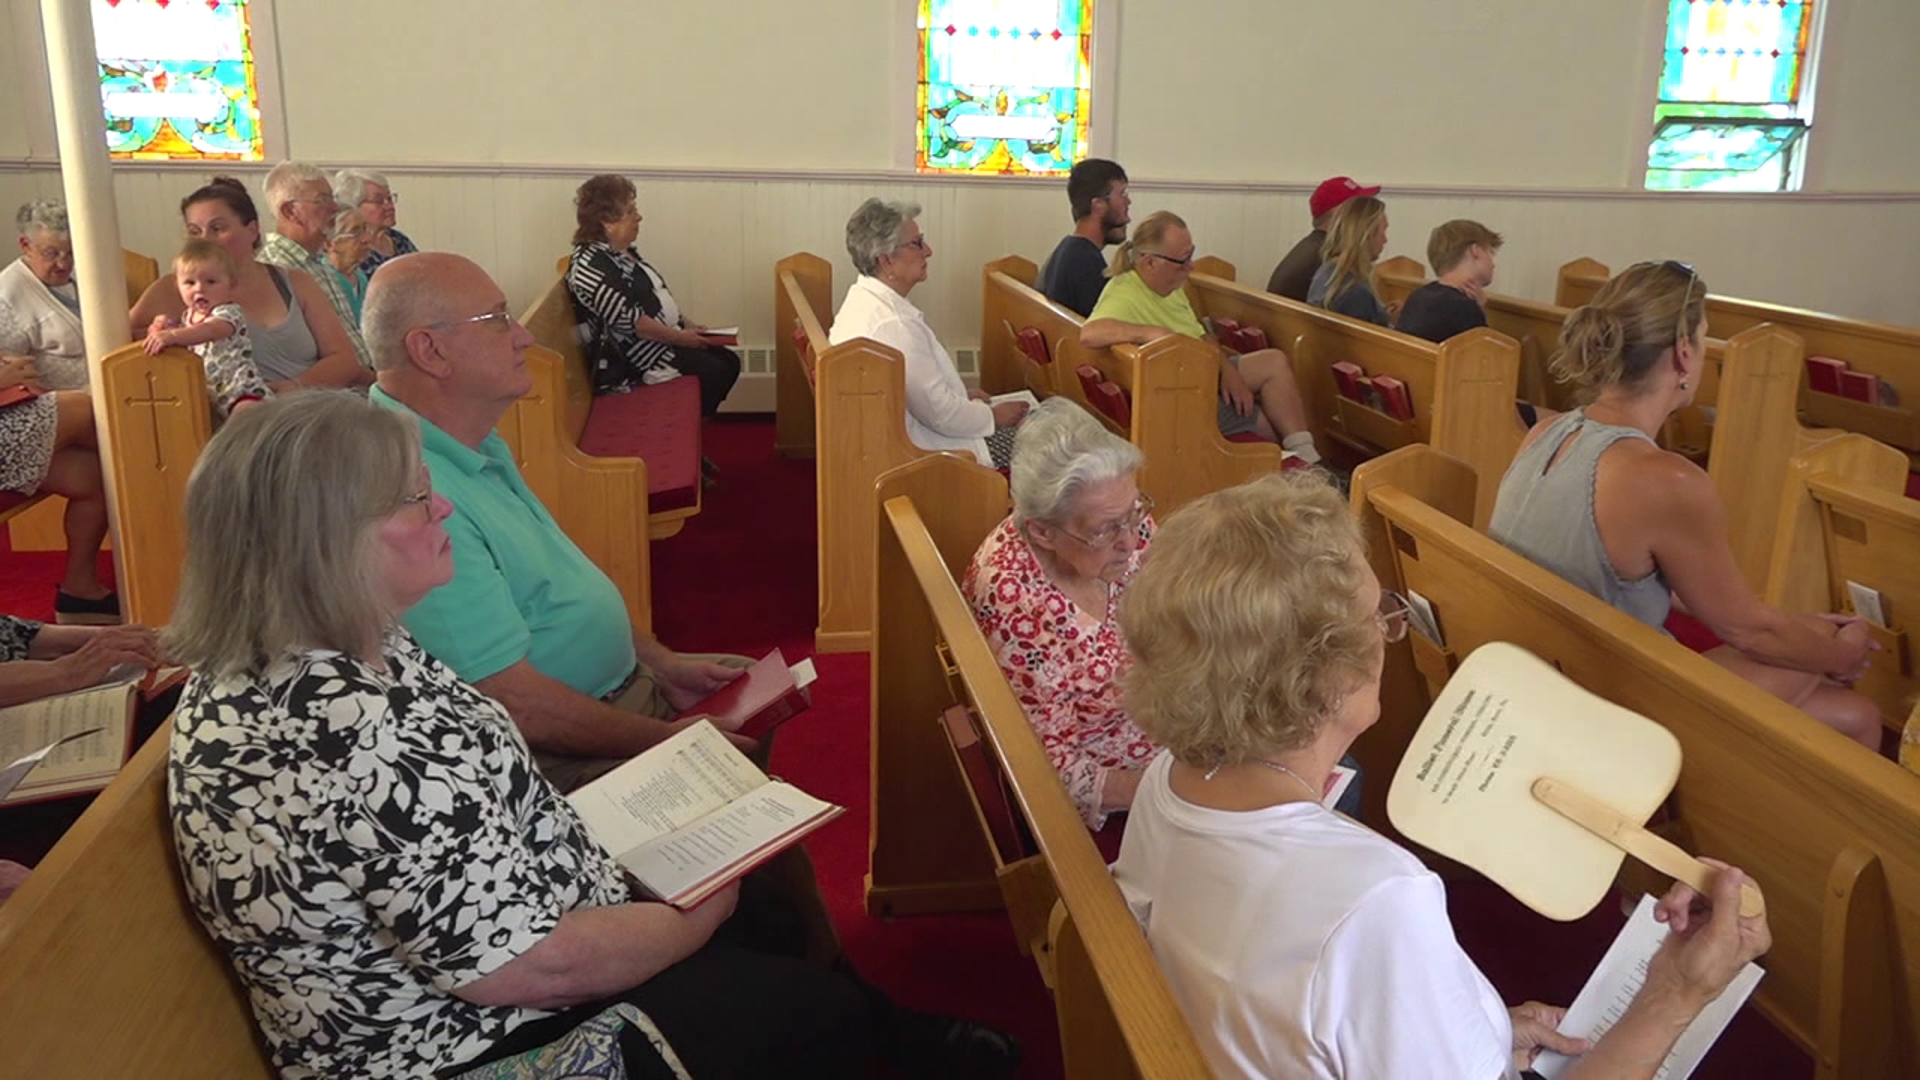 A church in Luzerne County has been a place of worship for the faithful for 140 years. On Sunday, the congregation celebrated the milestone while honoring veterans.